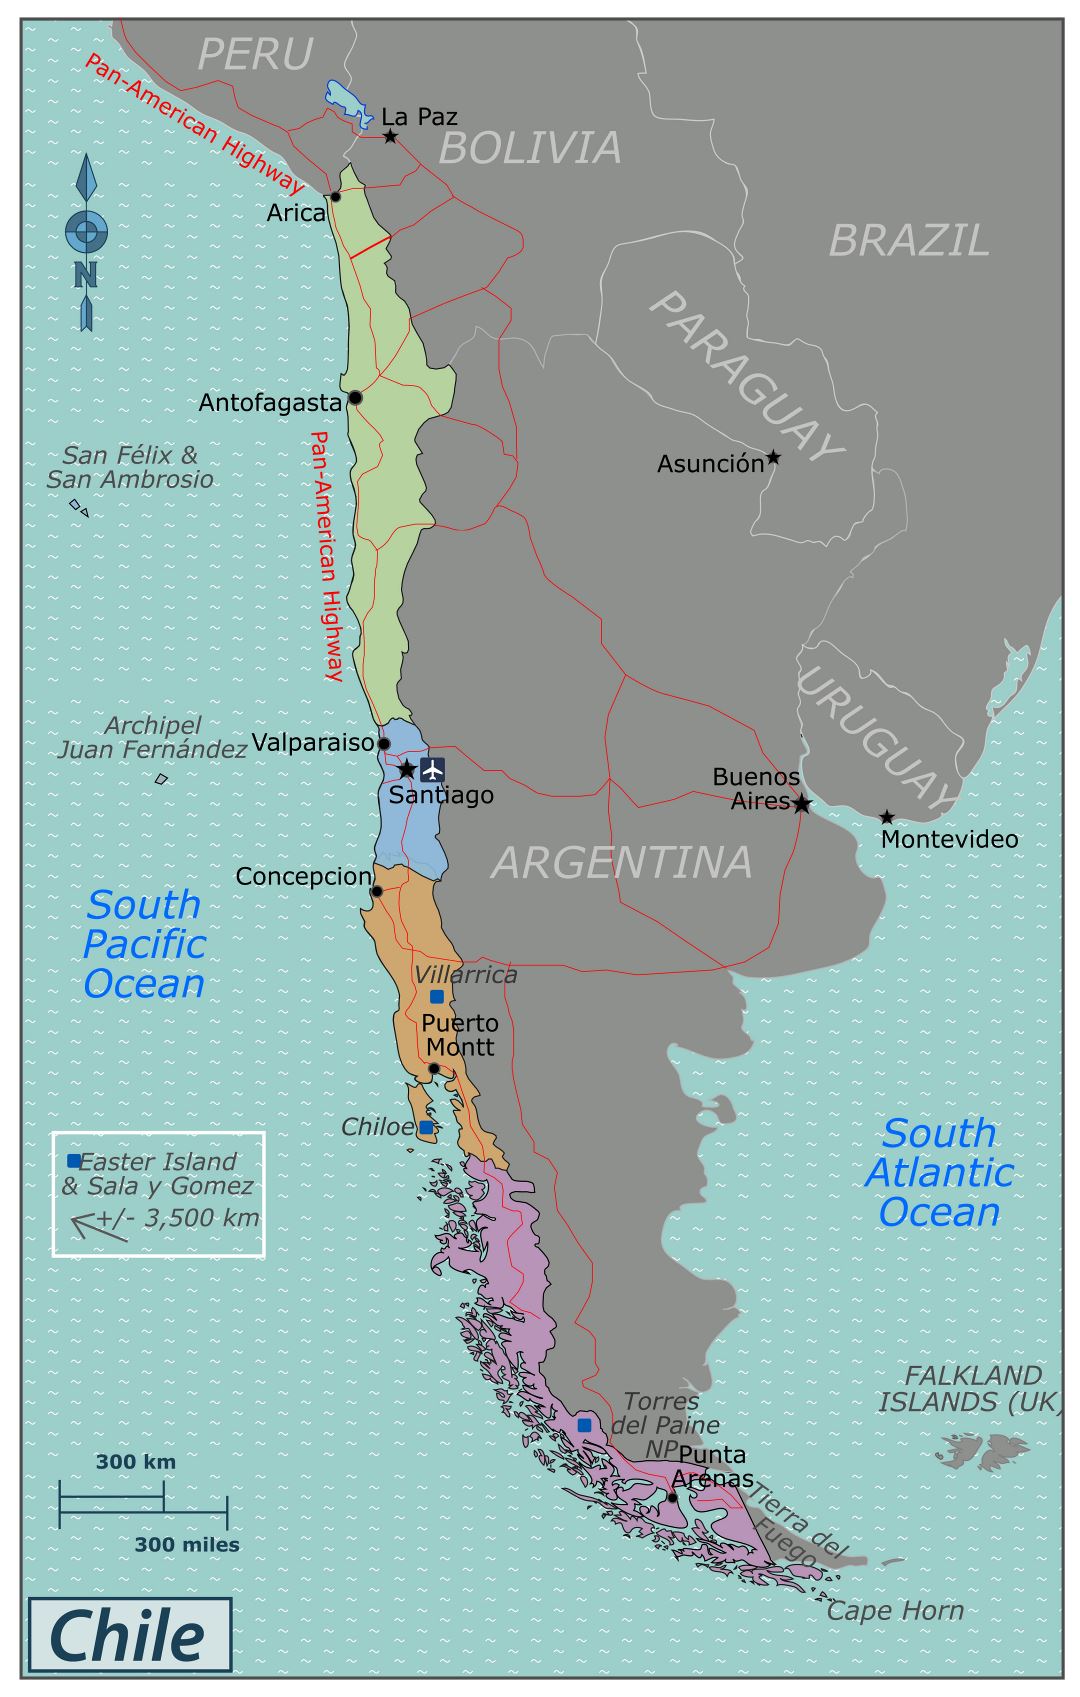 Large regions map of Chile